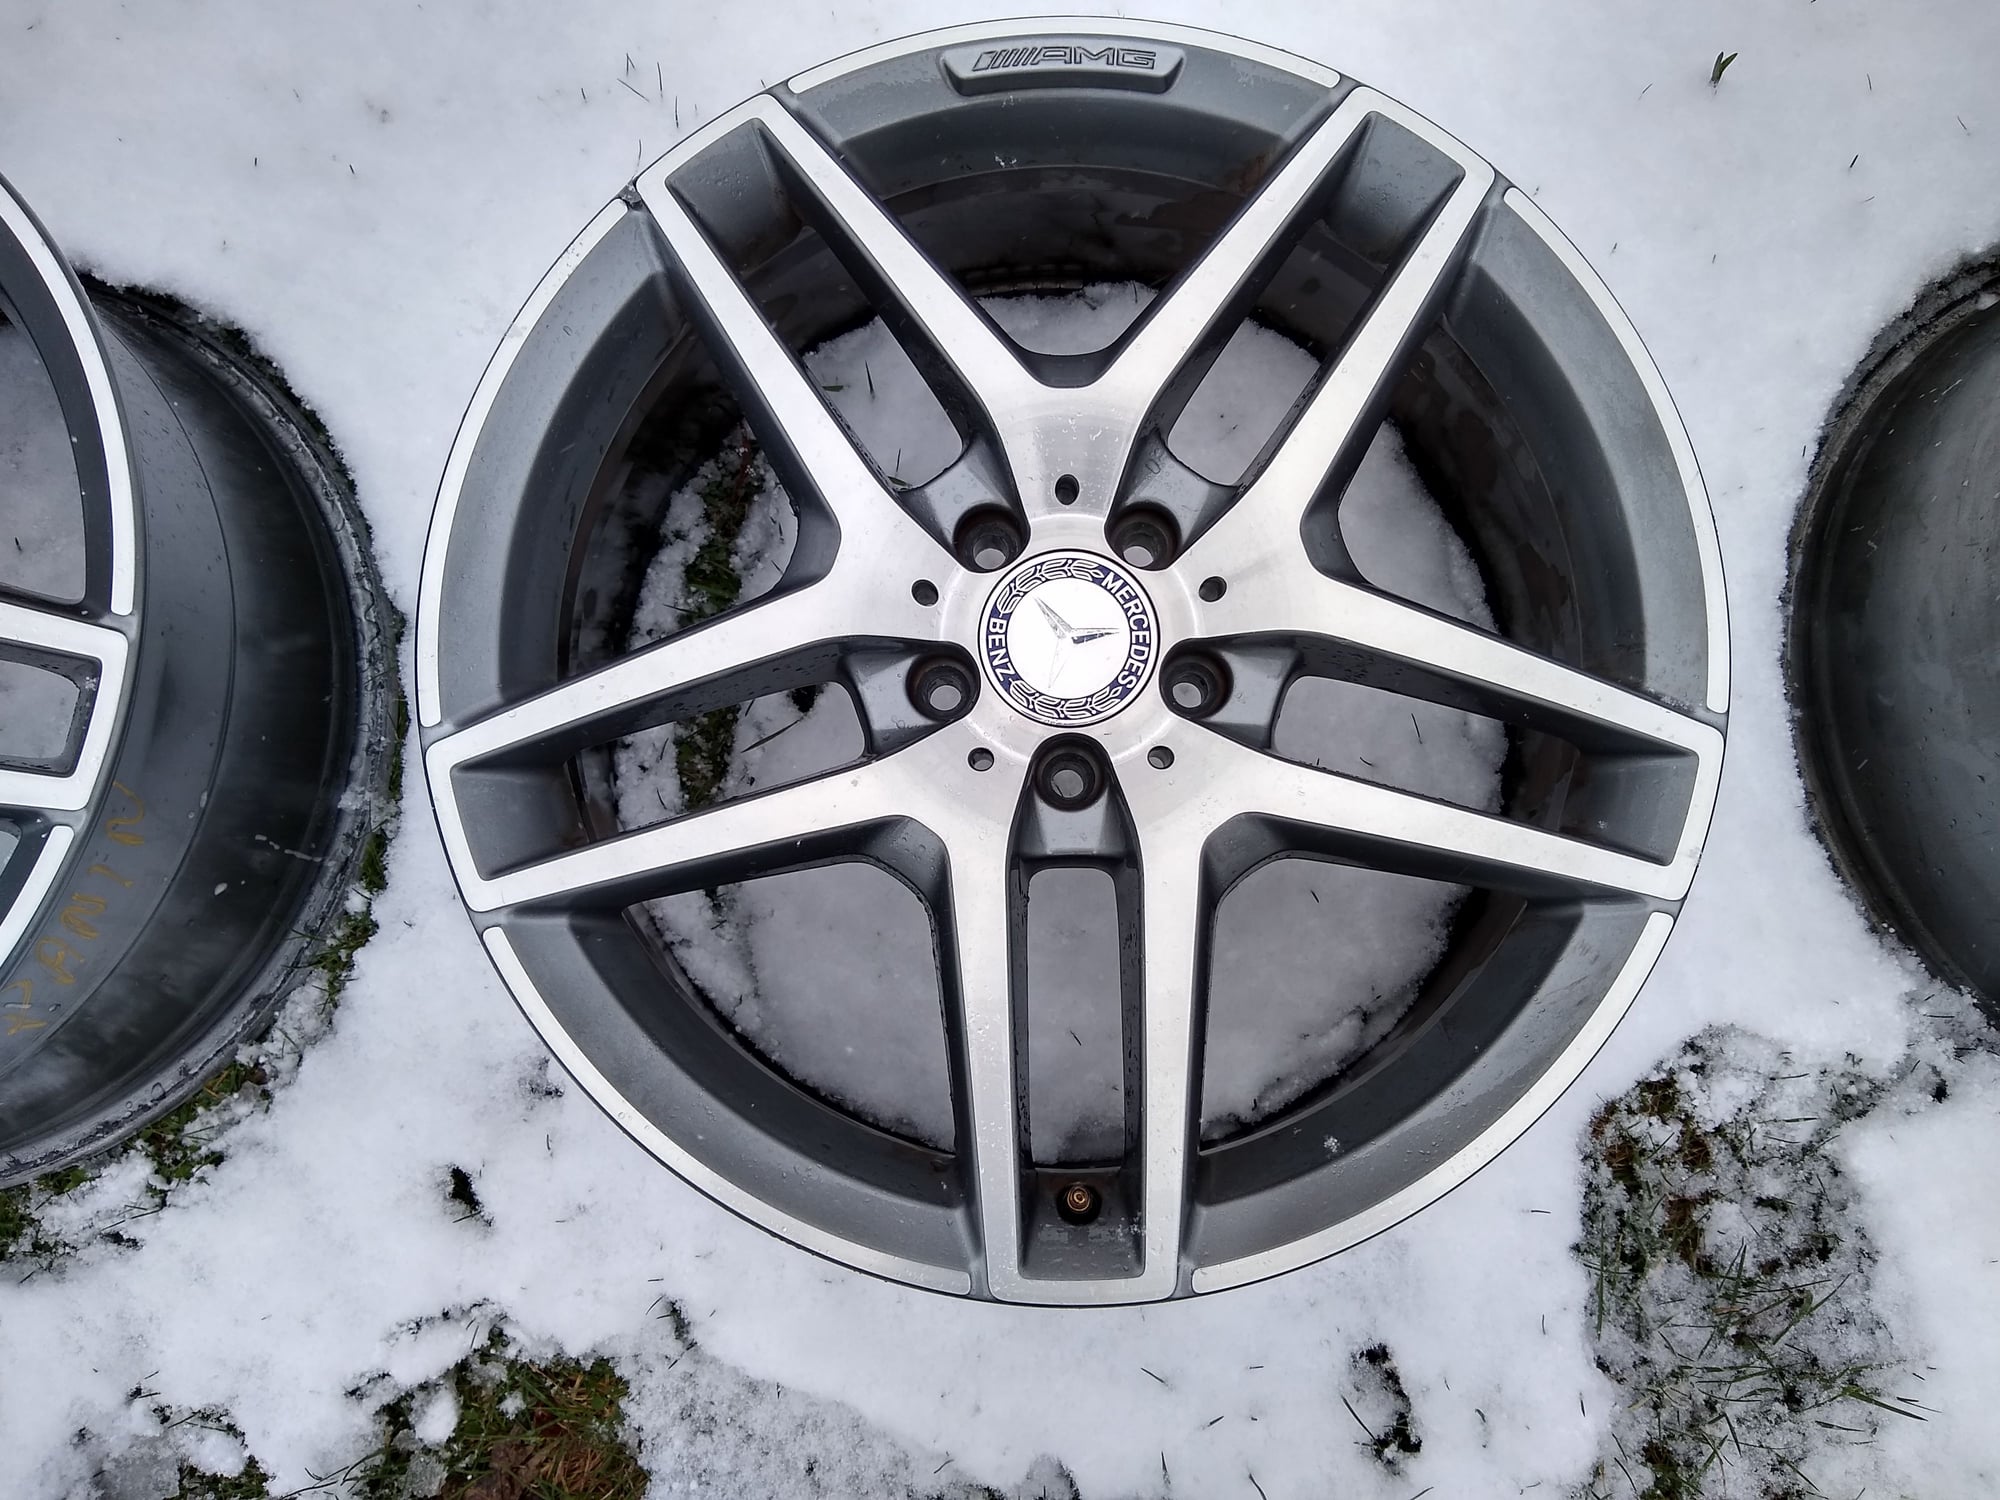 Wheels and Tires/Axles - W222 Mercedes S Class AMG WHEELS FOR SALE. OEM MADE IN GERMANY AMG WHEELS - Used - 2014 to 2020 Mercedes-Benz S550 - 2014 to 2020 Mercedes-Benz S63 AMG - Cleveland, OH 44101, United States